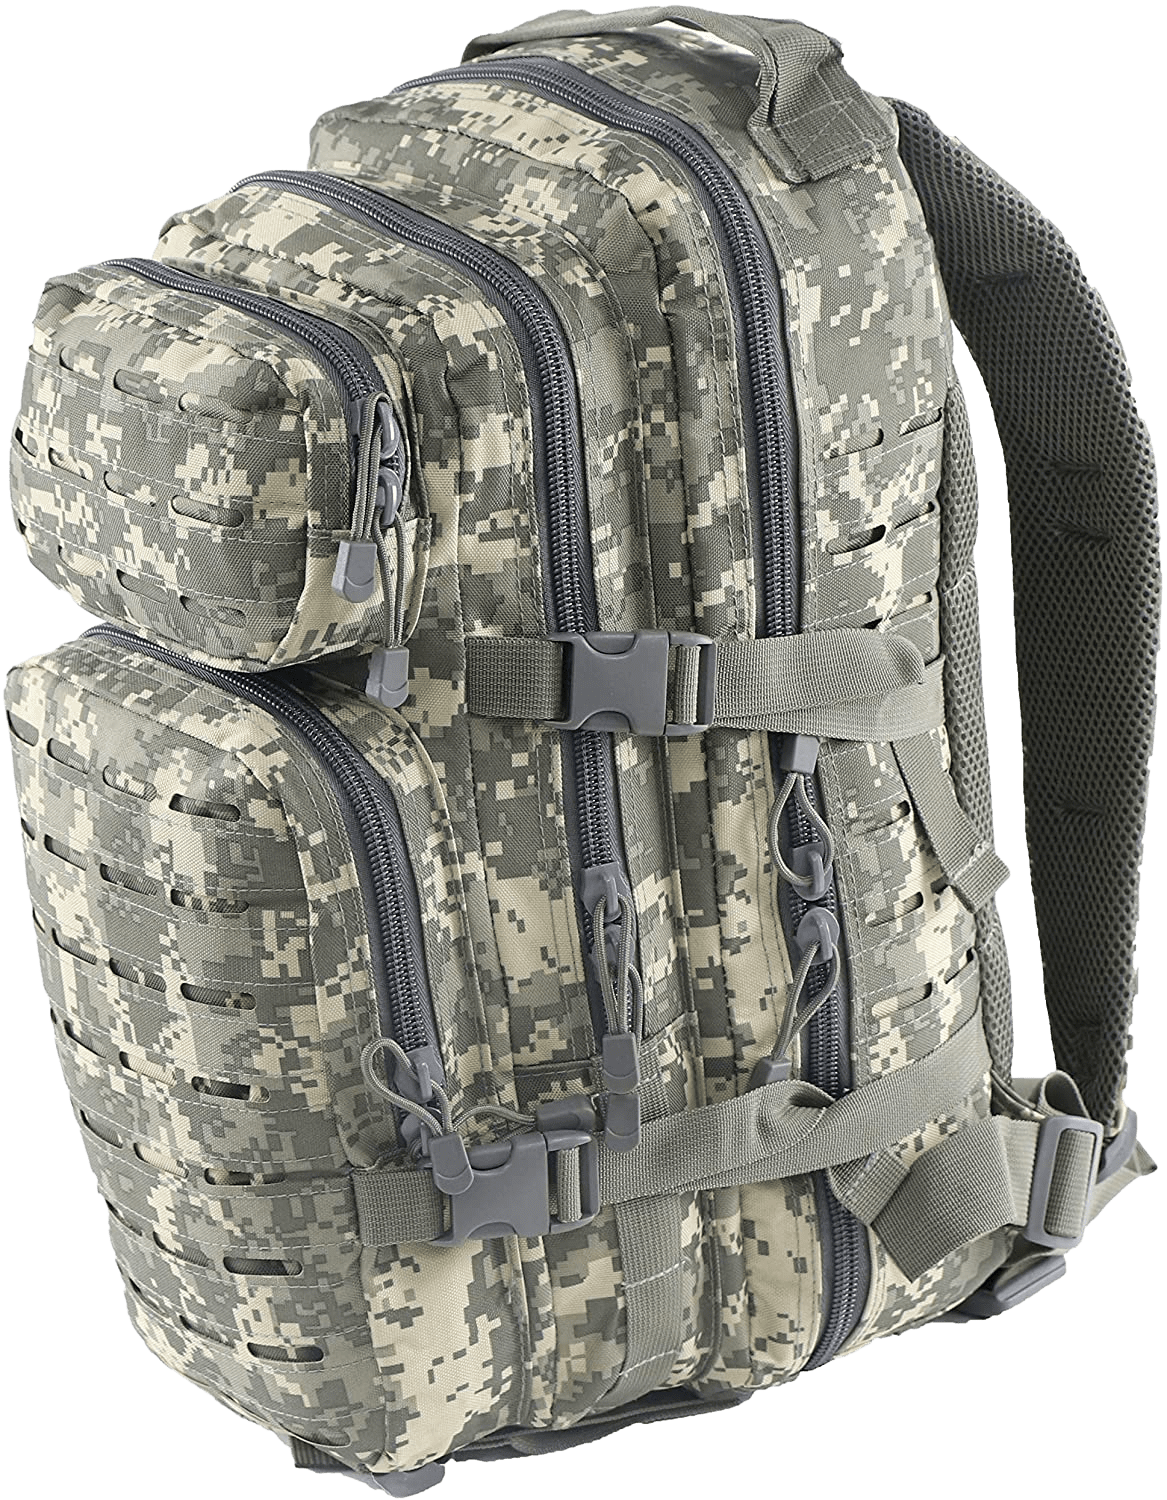 Sutekus Tactical Backpack Camouflage Rucksack MOLLE/PALS Military Assault Pack Waterproof Backpack 28L (ACU Camouflage) - Home Decor Gifts and More